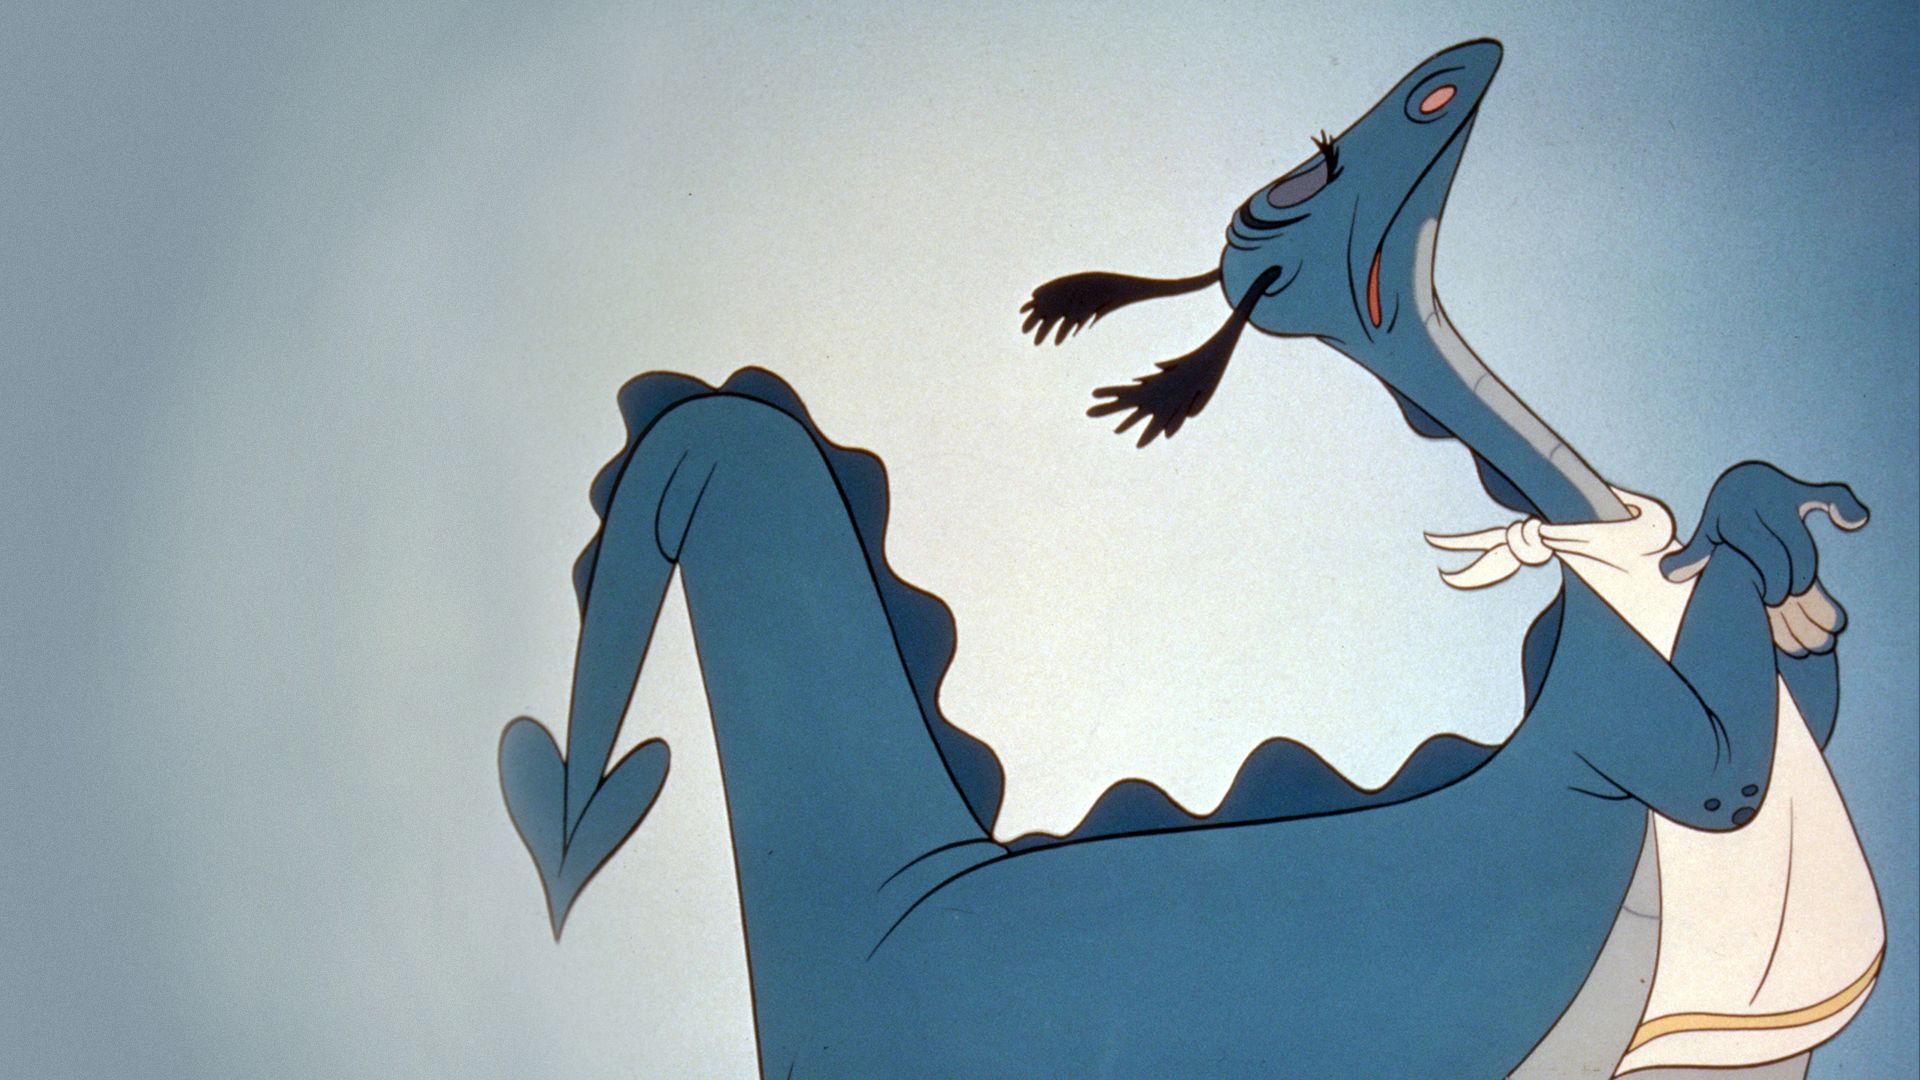 Celebrate this Lunar New Year with 10 Films Featuring Iconic Disney Dragons! 1